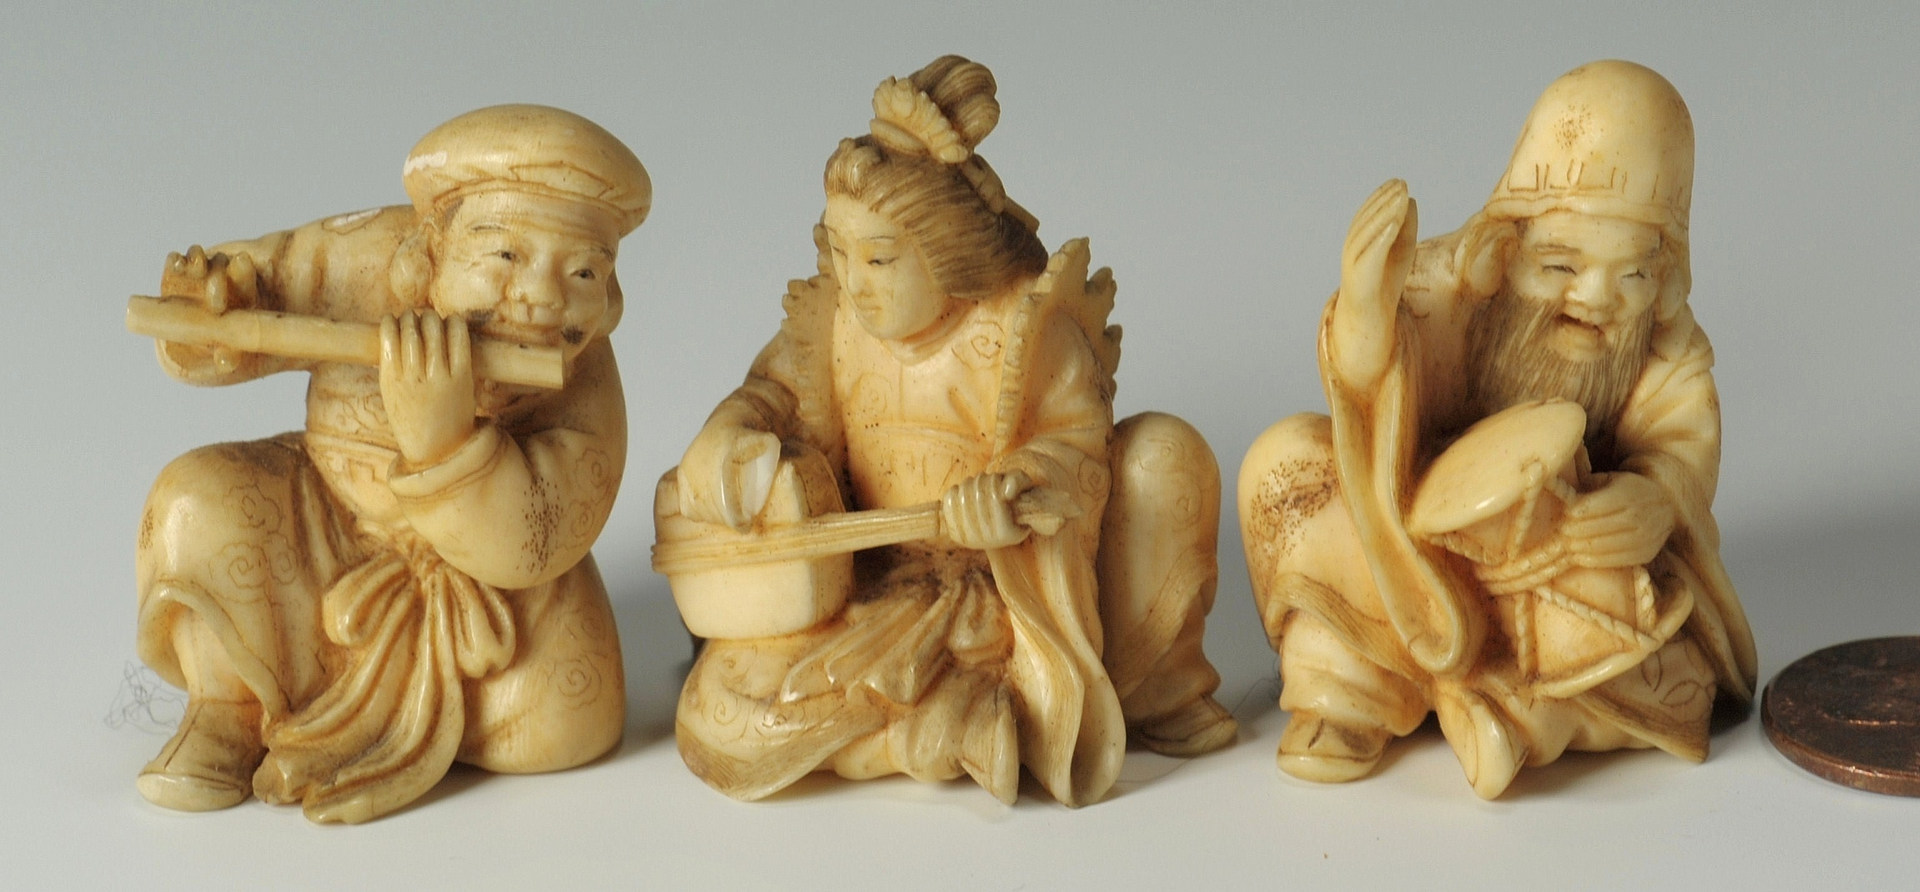 Lot 191: 3 Japanese carved ivory musician figures